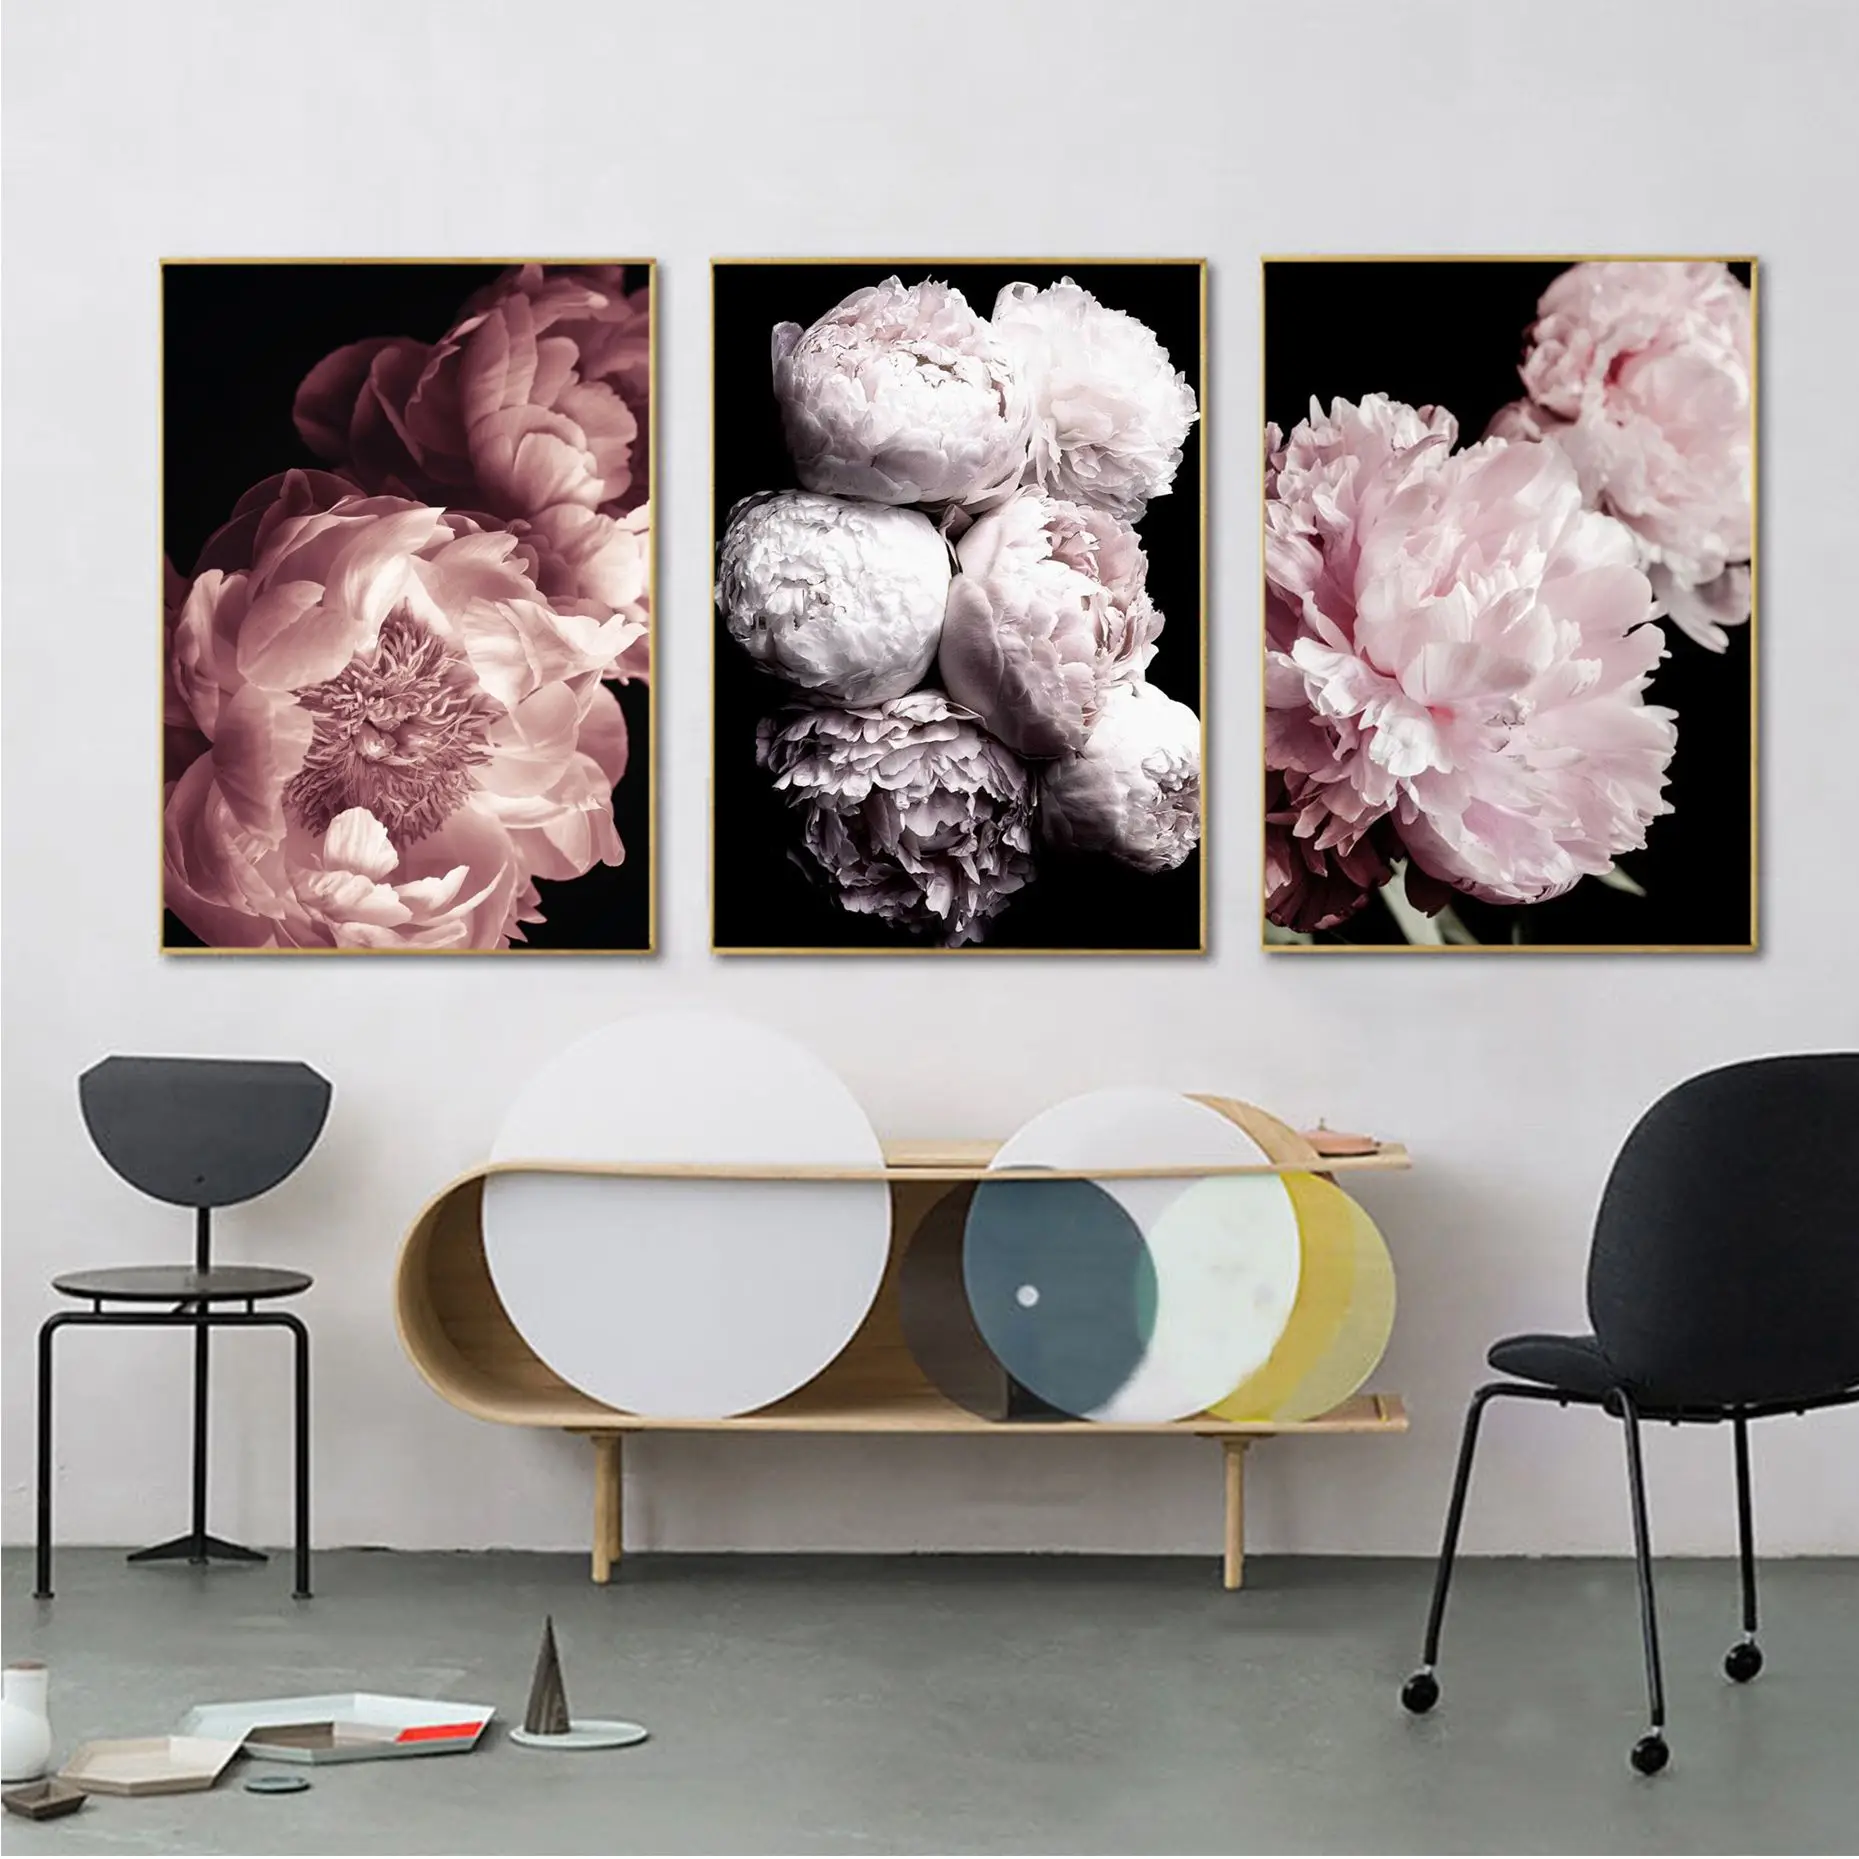 Flowers Pink Peony Floral Classic Movie Posters Fancy Wall Sticker for Living Room Bar Decoration Aesthetic Art Wall Painting